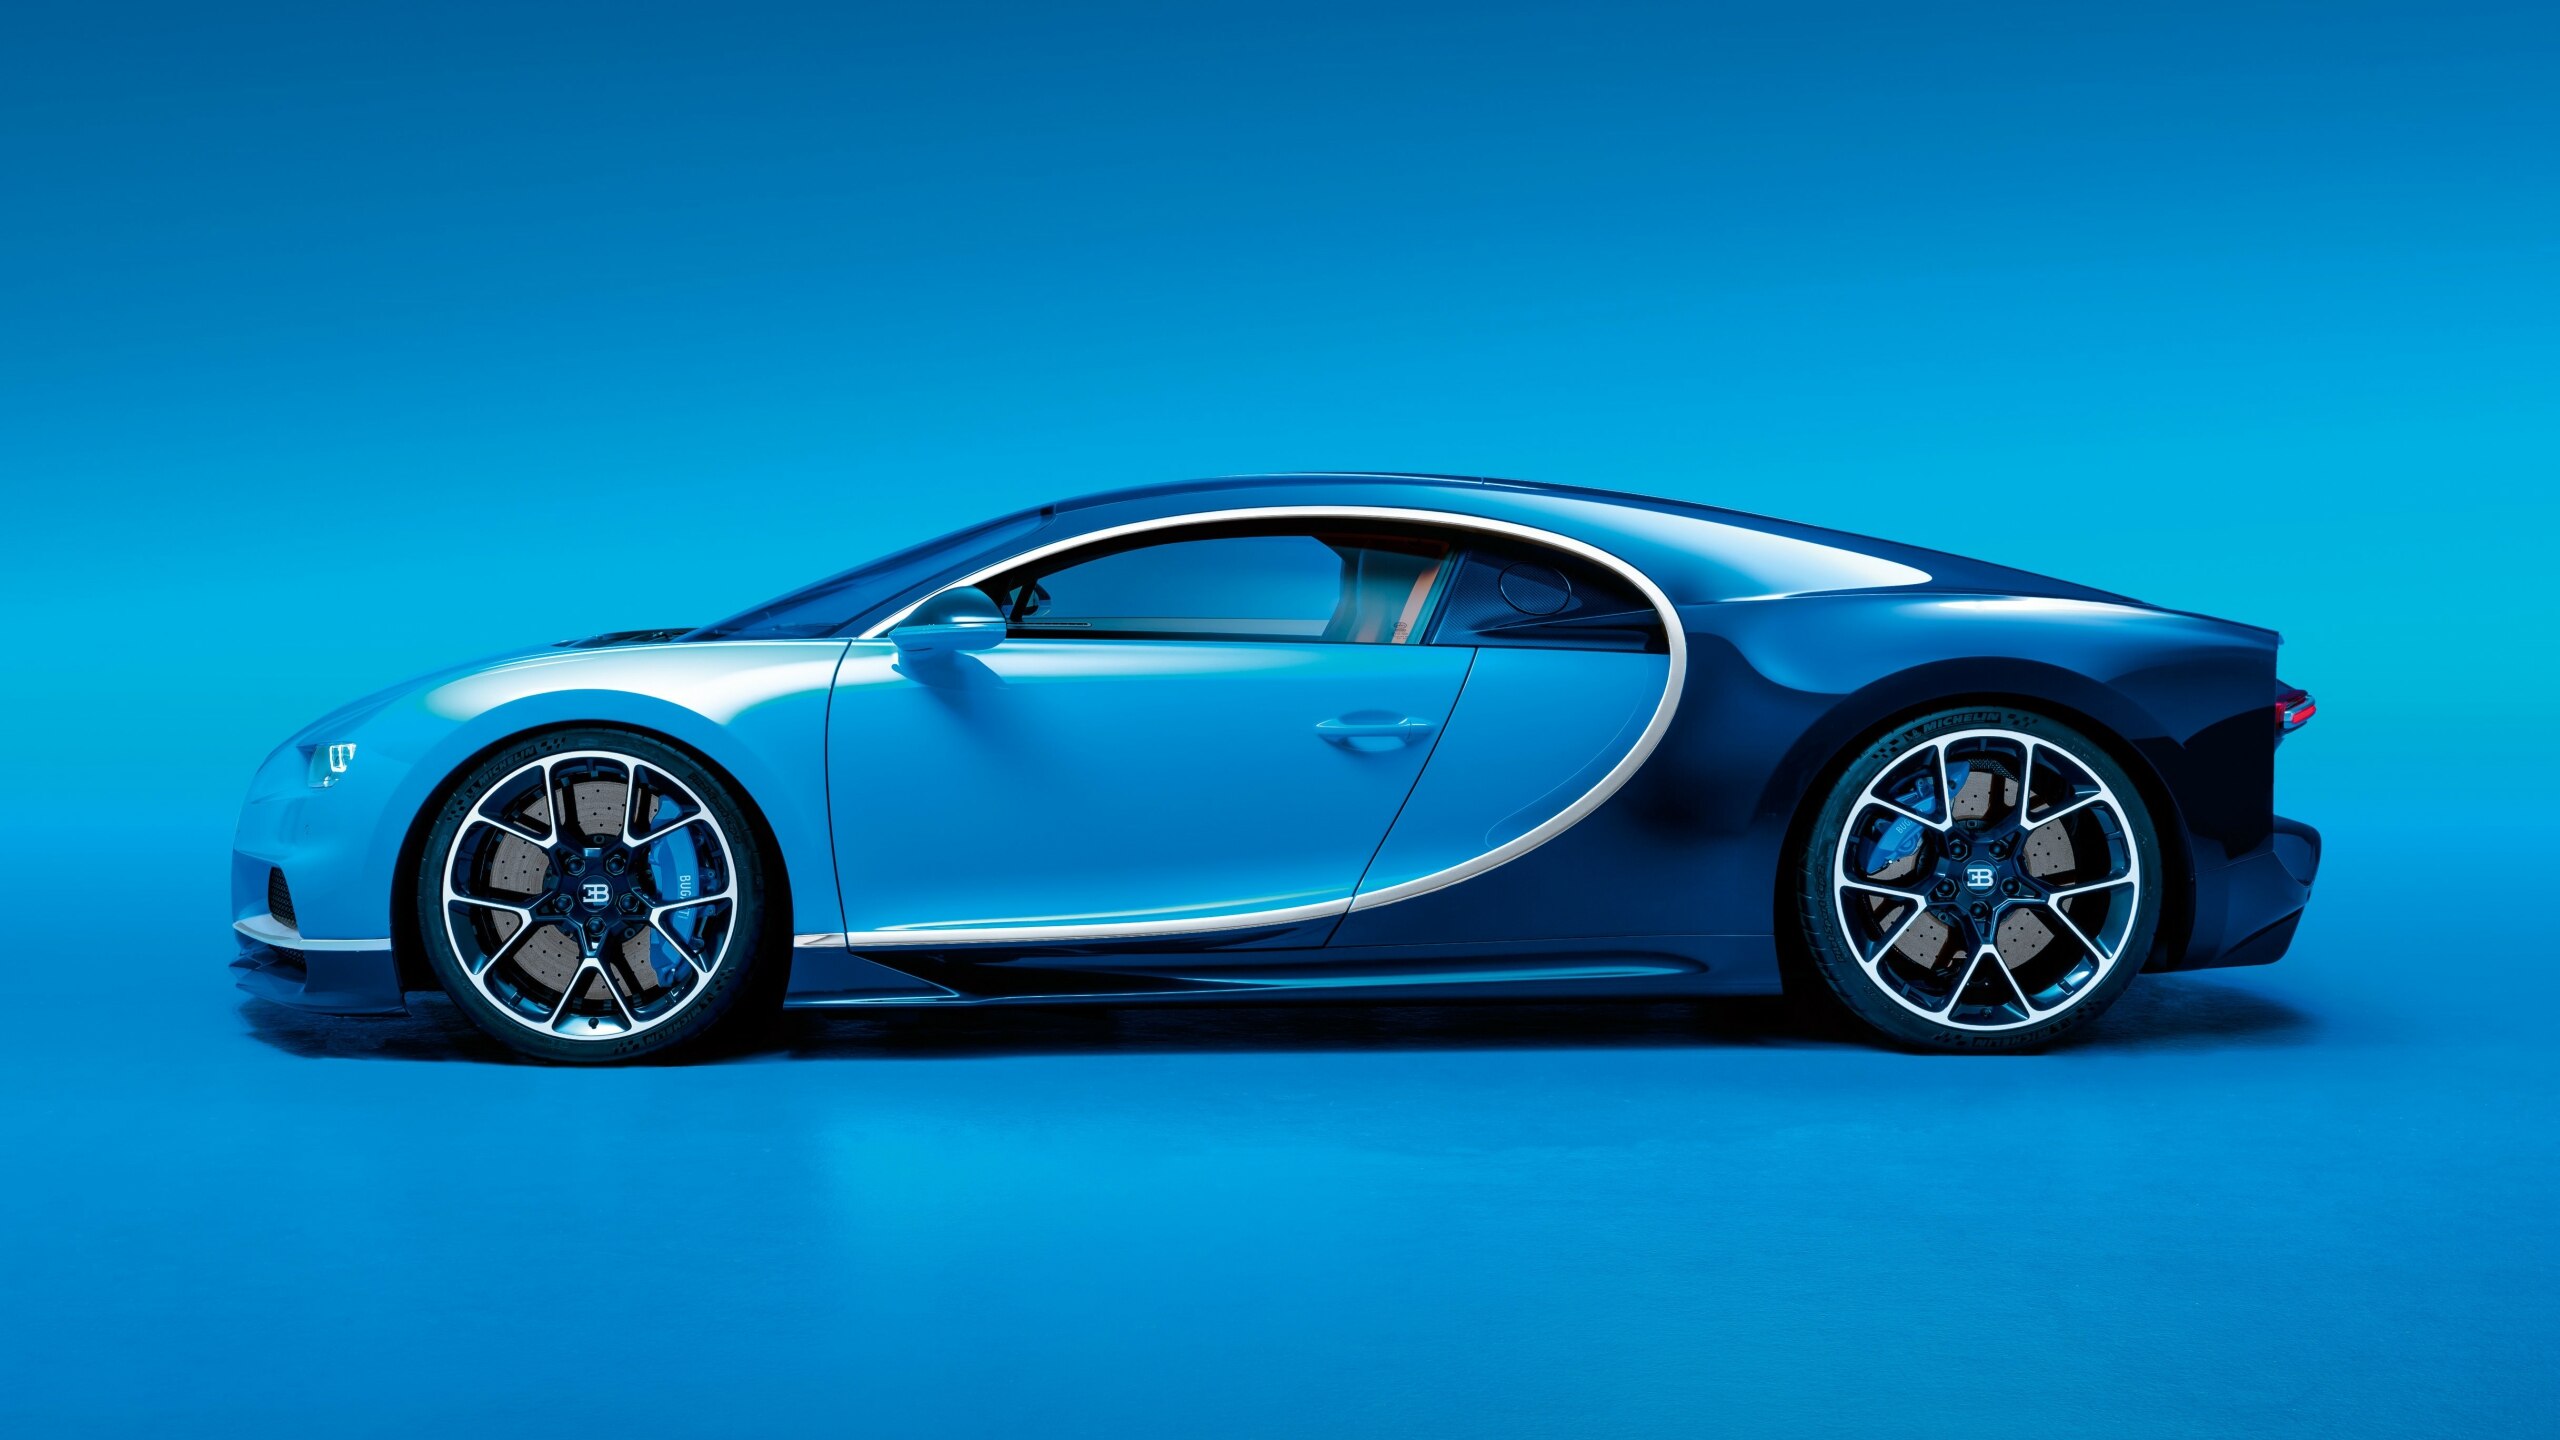 Bugatti's Final Ode To Excellence Introducing 'L’Ultime' – The Ultimate Chiron